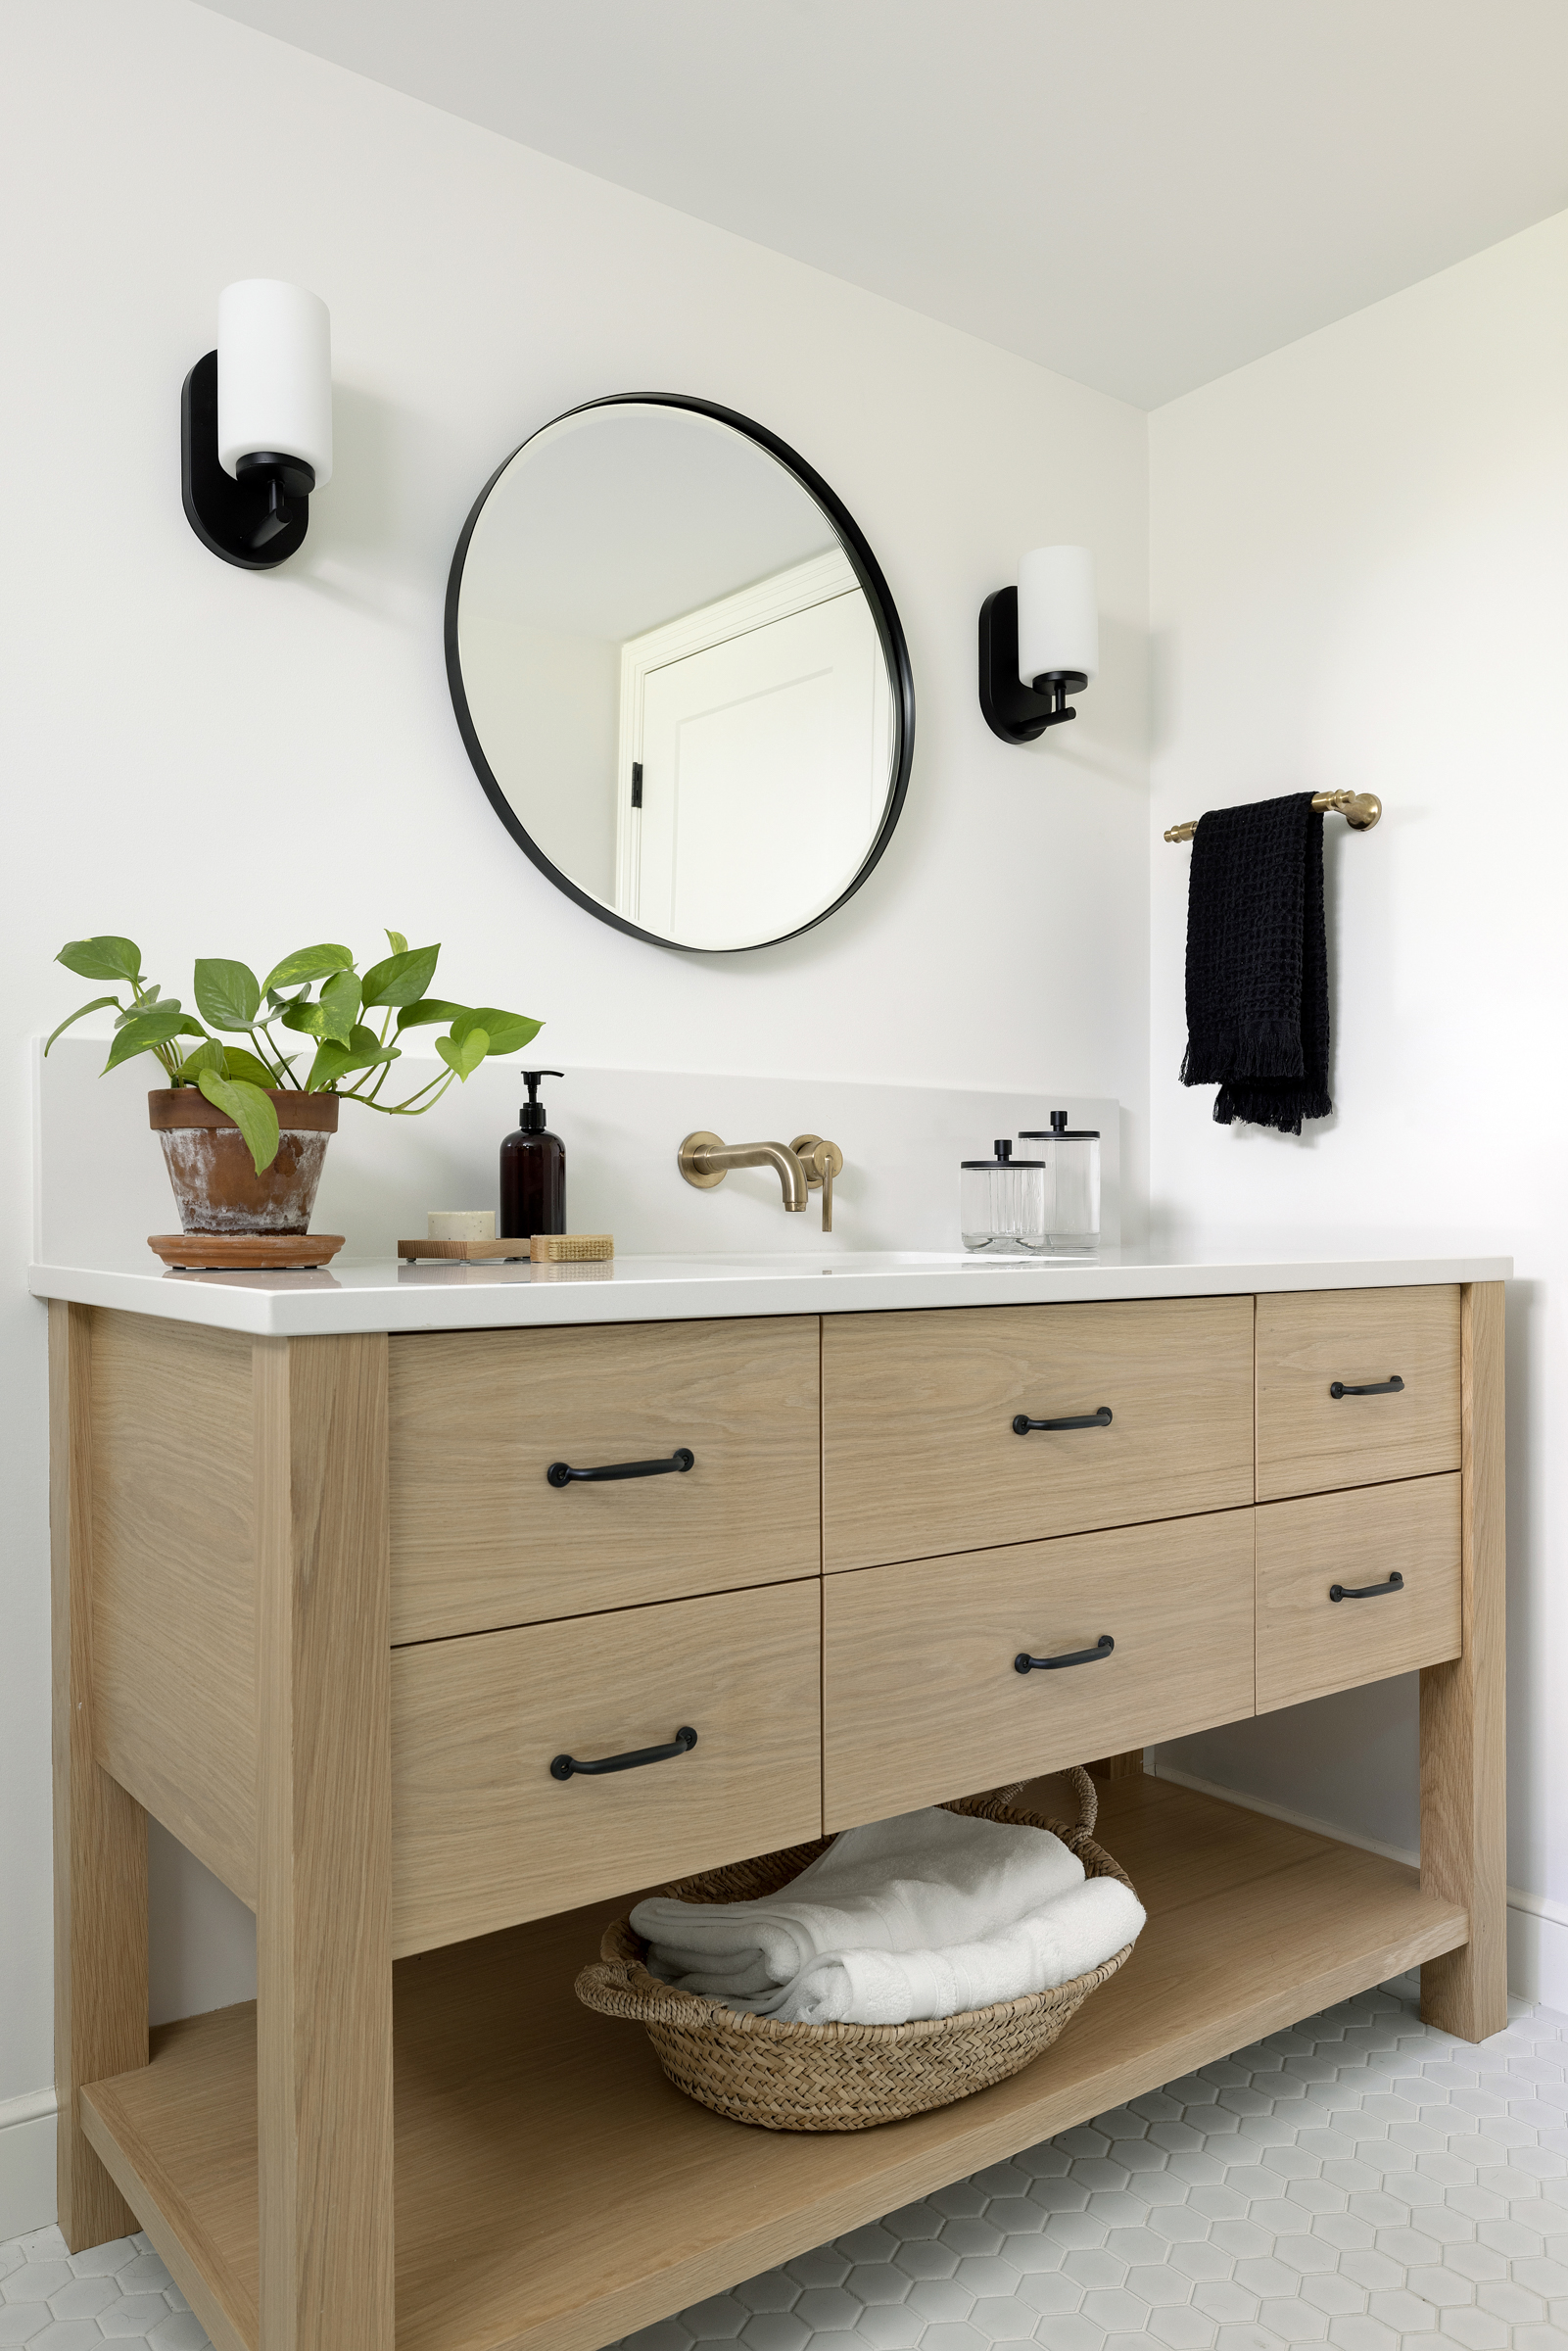 Twin Cities bathroom renovation with white oak Jkath Arden vanity and black accents.